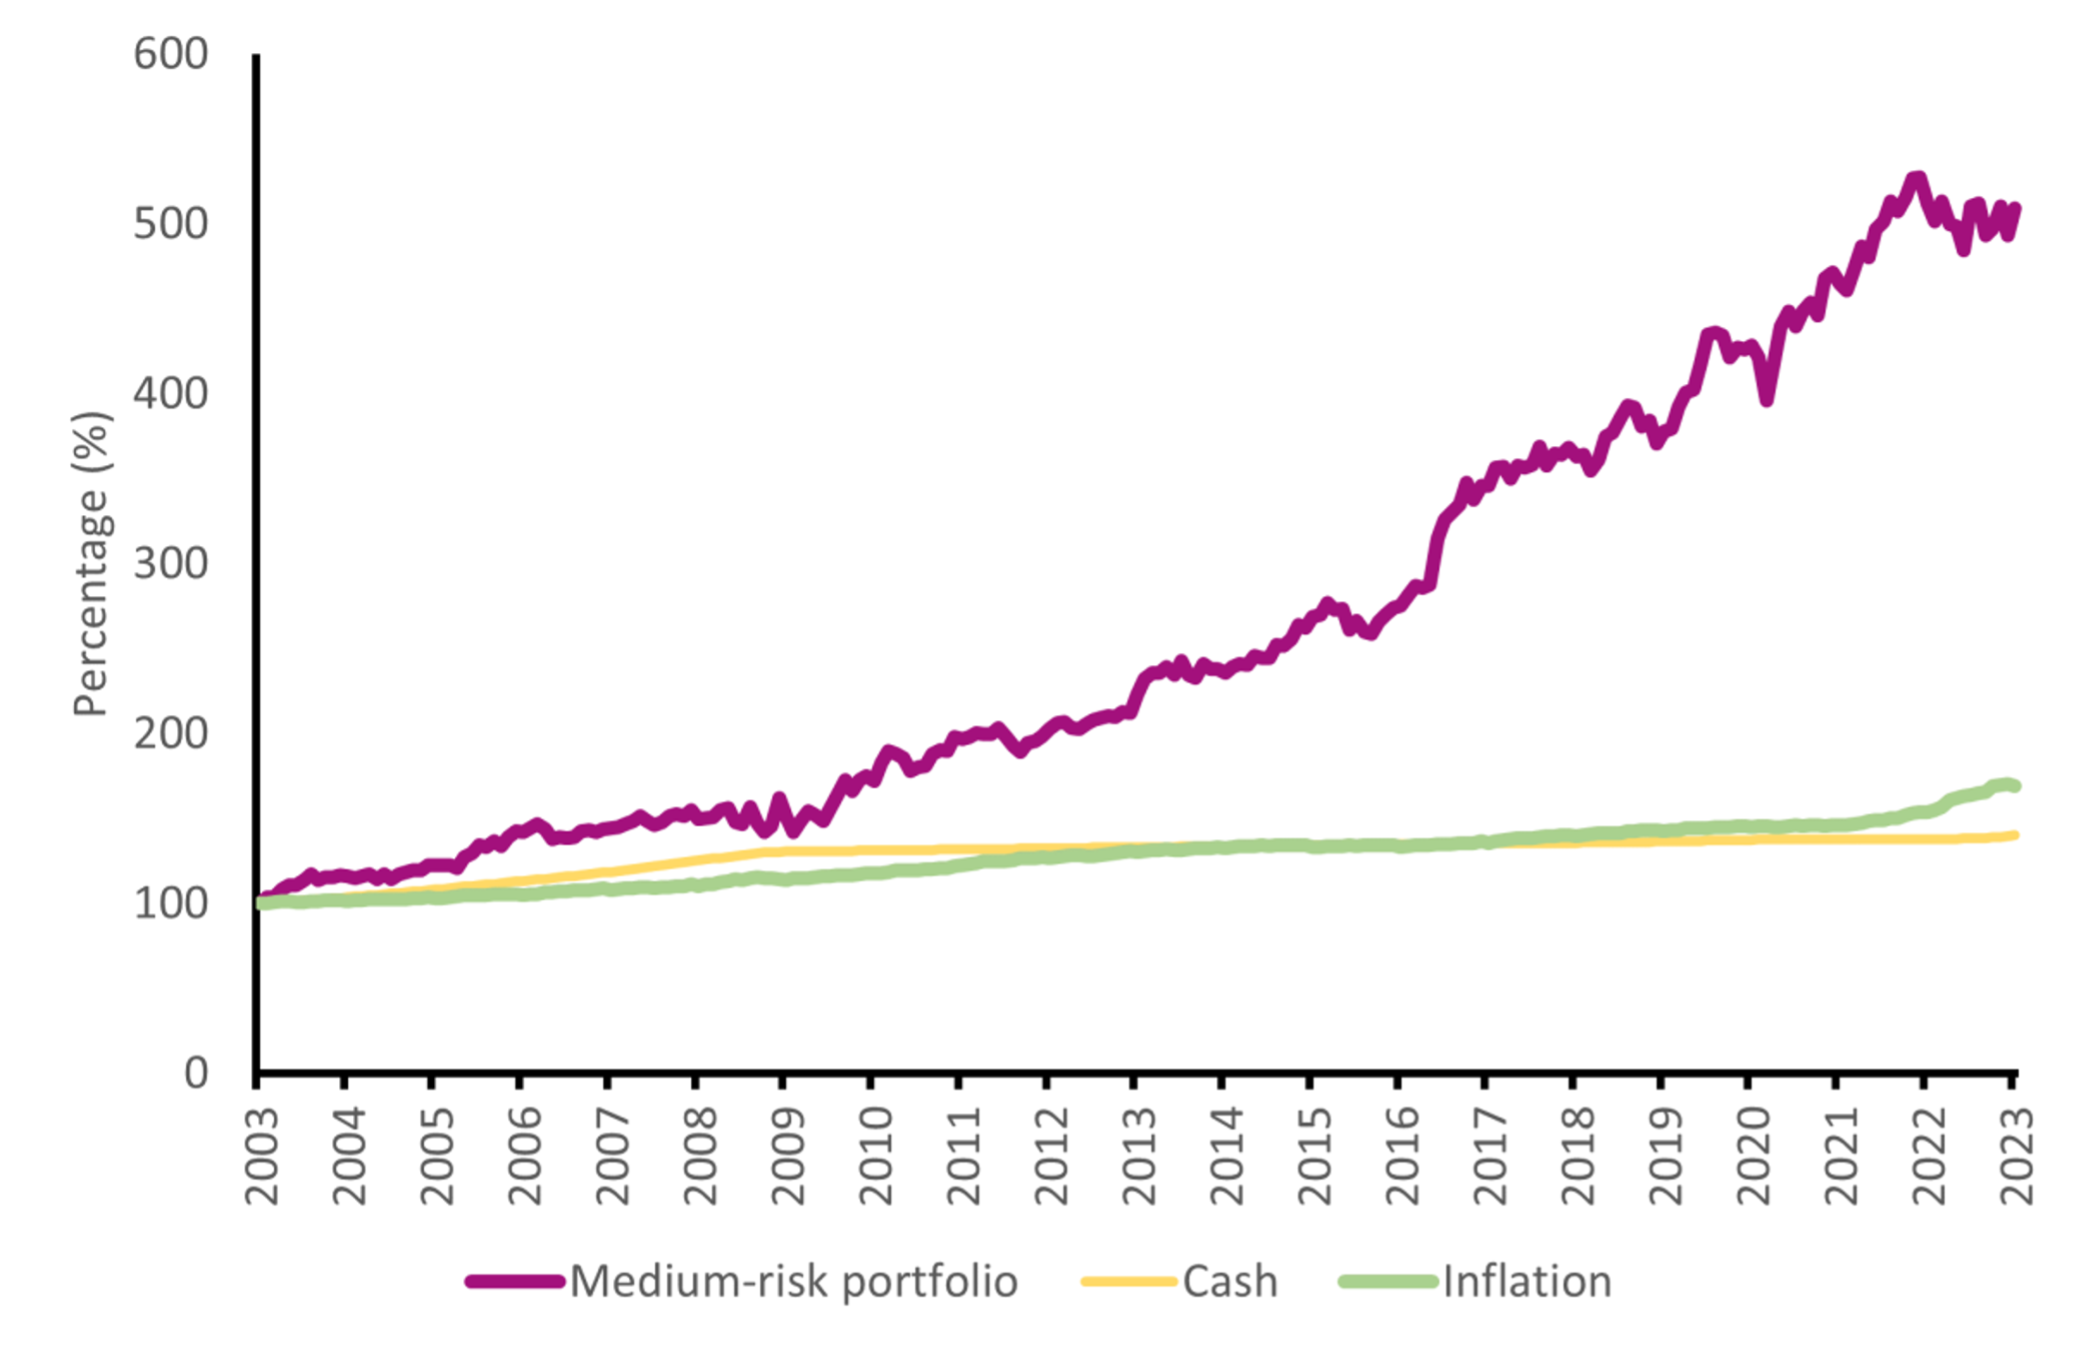 How a medium-risk portfolio has performed against cash and inflation